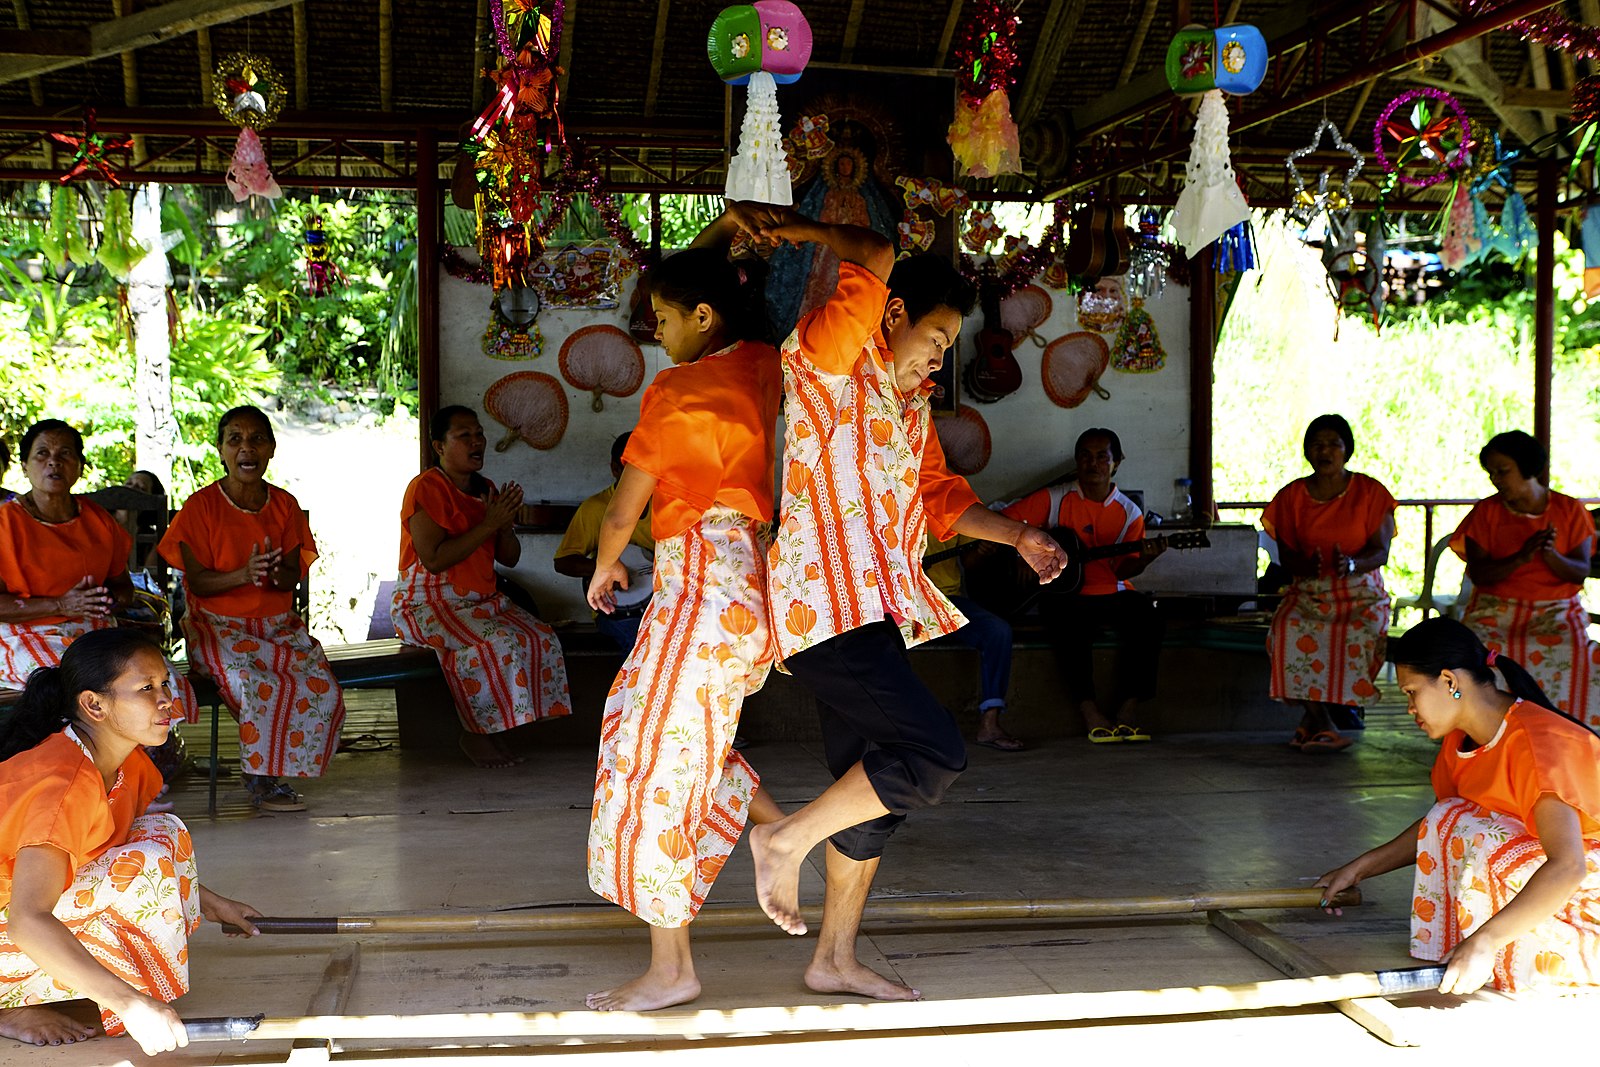 Two individuals are holding hands and are facing opposite directions with their backs against one another in a popular folk dance from the Philippines called the Tinikling.